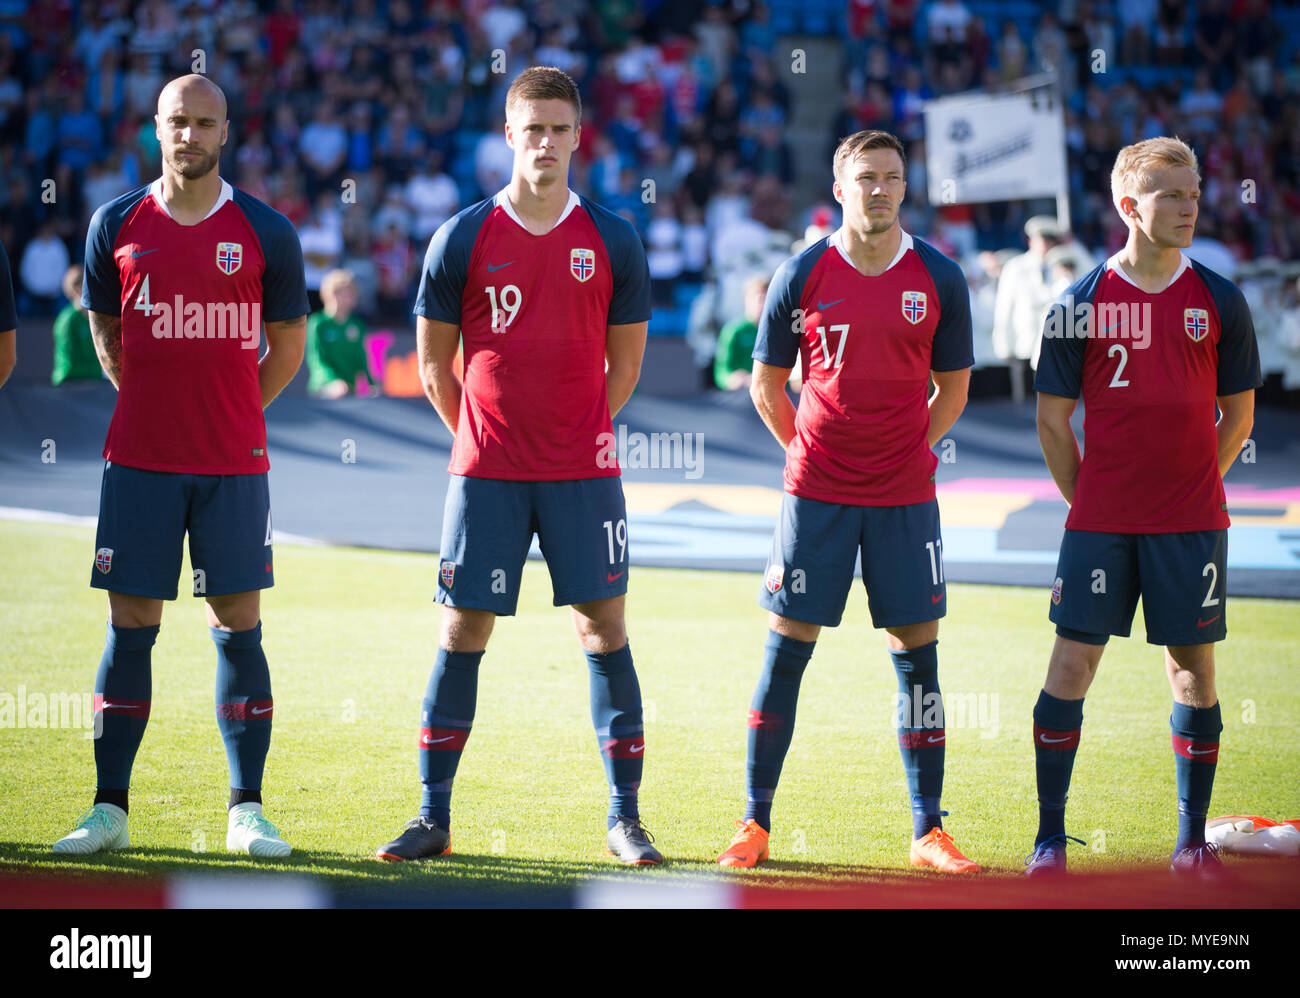 Norway, Oslo - June 6, 2018. ITore Reginiussen (4), Markus Henriksen (19),  Martin Linnes (17) and Birger Meling (2) of Norway seen during national  anthem before football friendly between Norway and Panama